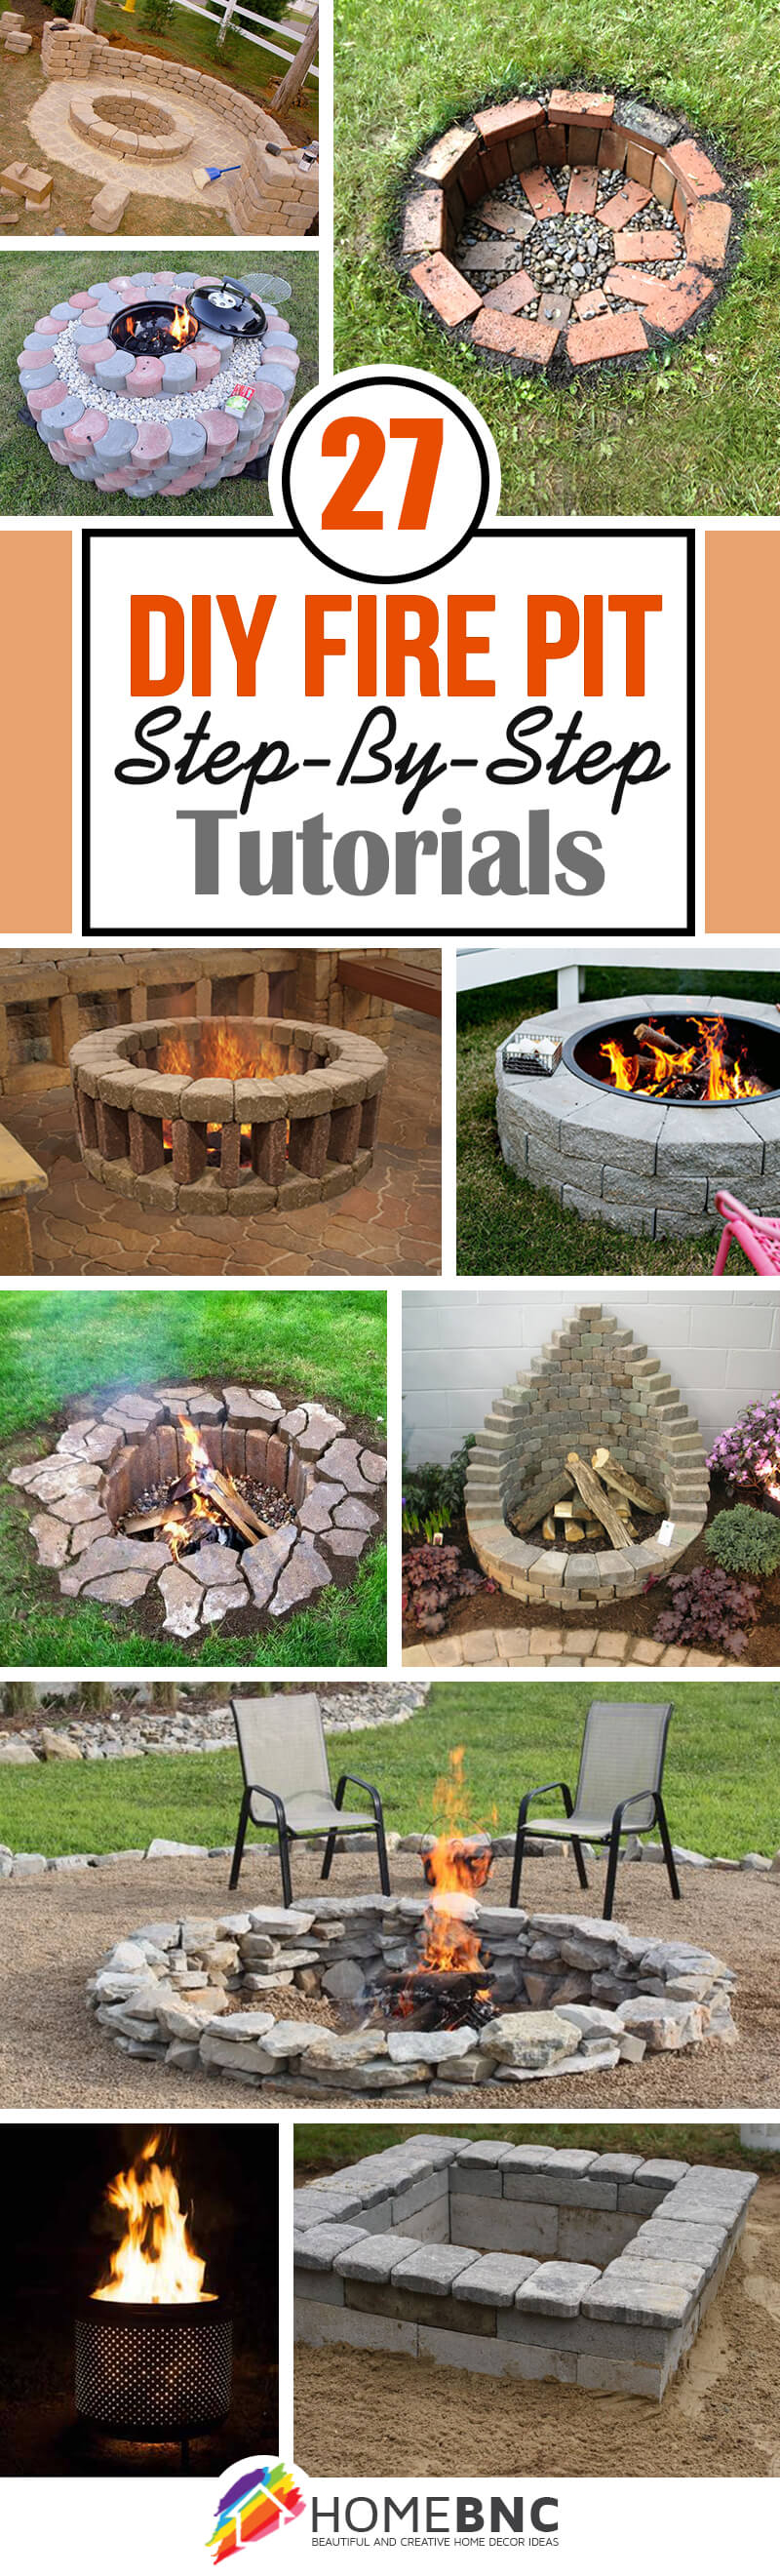 27 Best Diy Firepit Ideas And Designs, Fire Pit Ring Designs